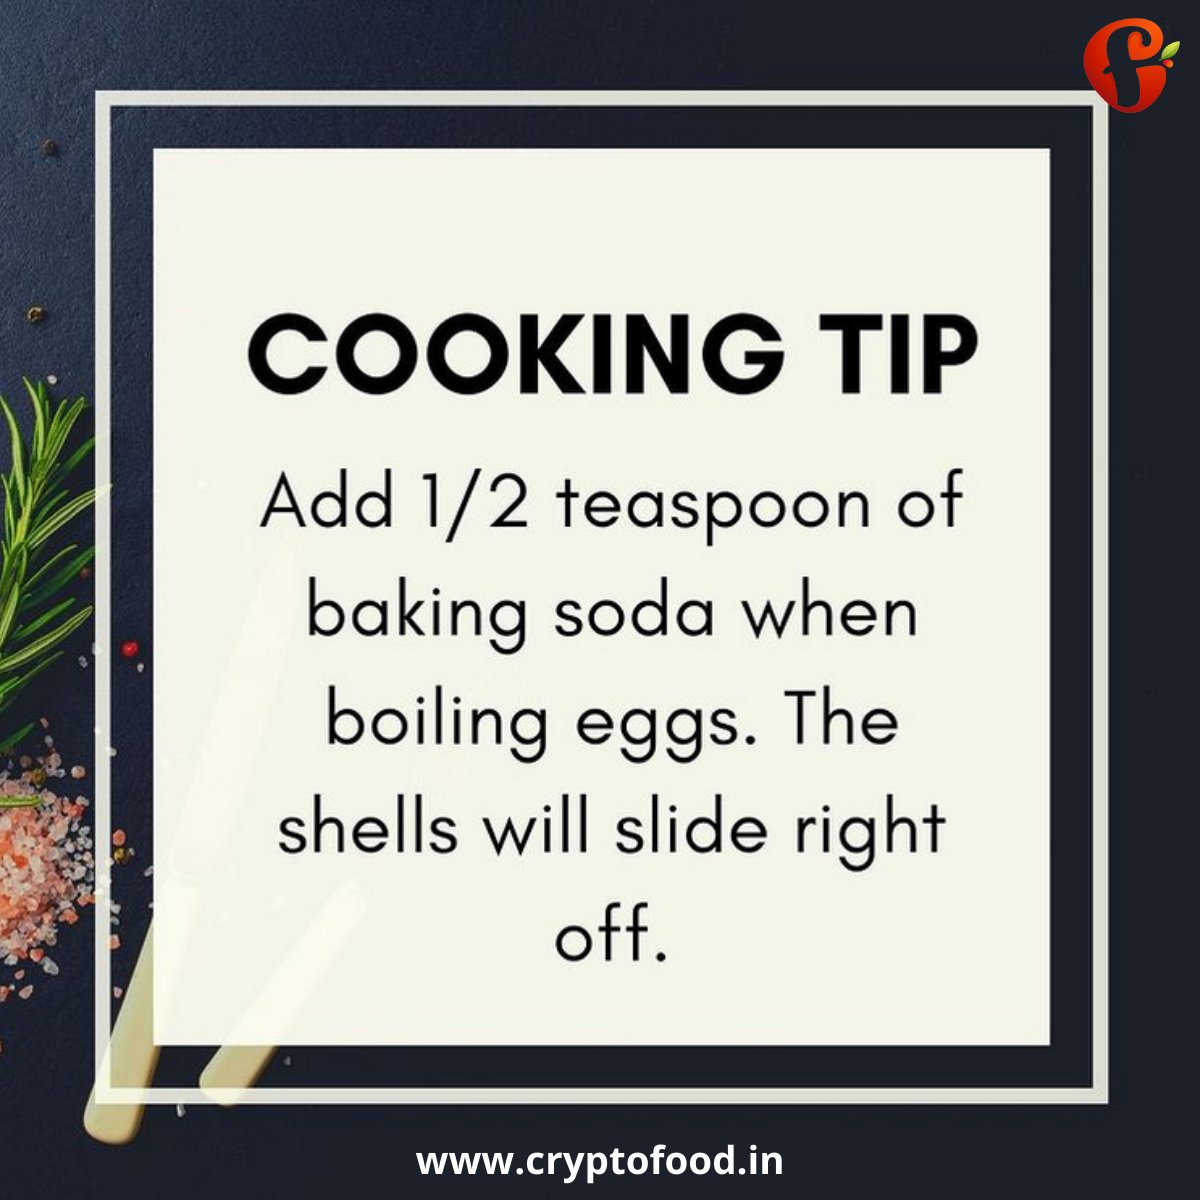 Removing a shell from a hard-boiled egg can be challenging sometimes. But not anymore!

Visit: cryptofood.in

#spicemix #cookingwithspices #spiceupyourlife #spice #spices #herbs #organic #vegan #food #marketing #healthyeating #nutrition #healthyfood #wellness #healthy